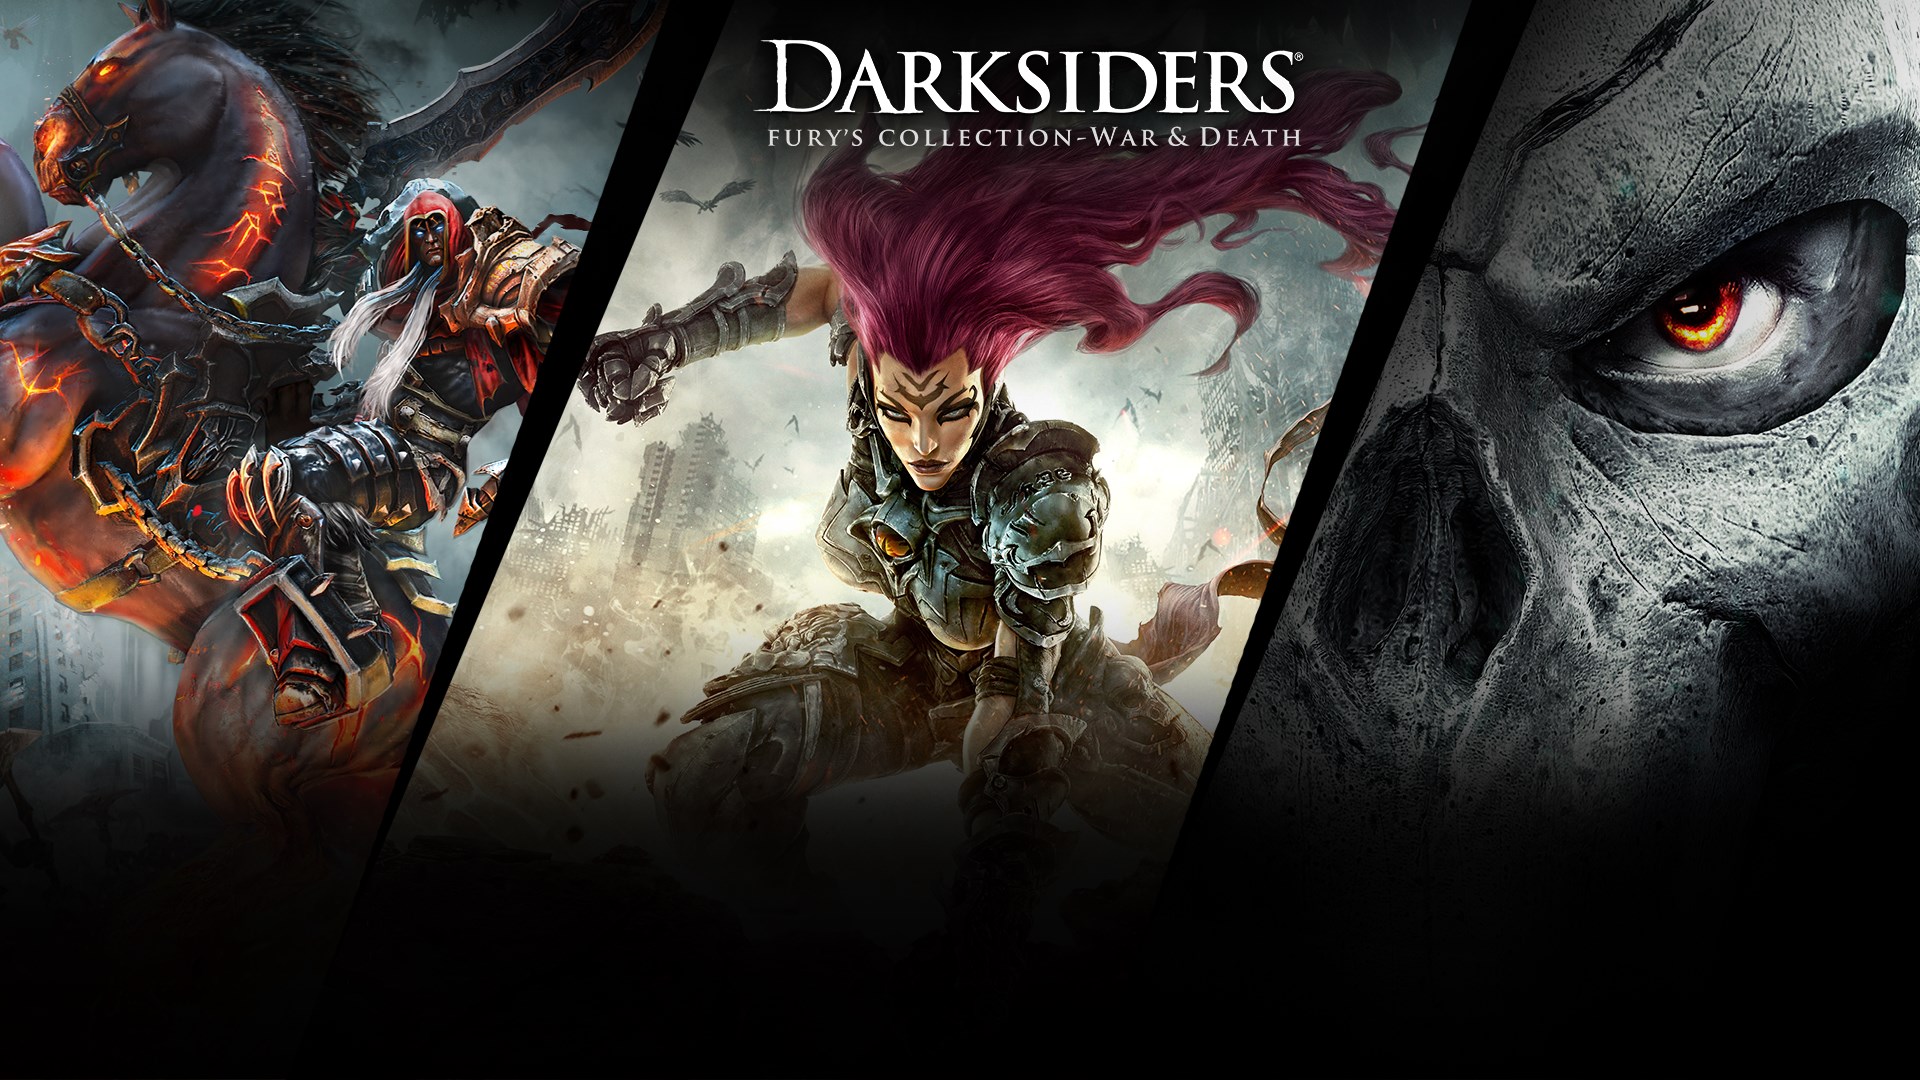 Darksiders Fury's Collection - War and Death